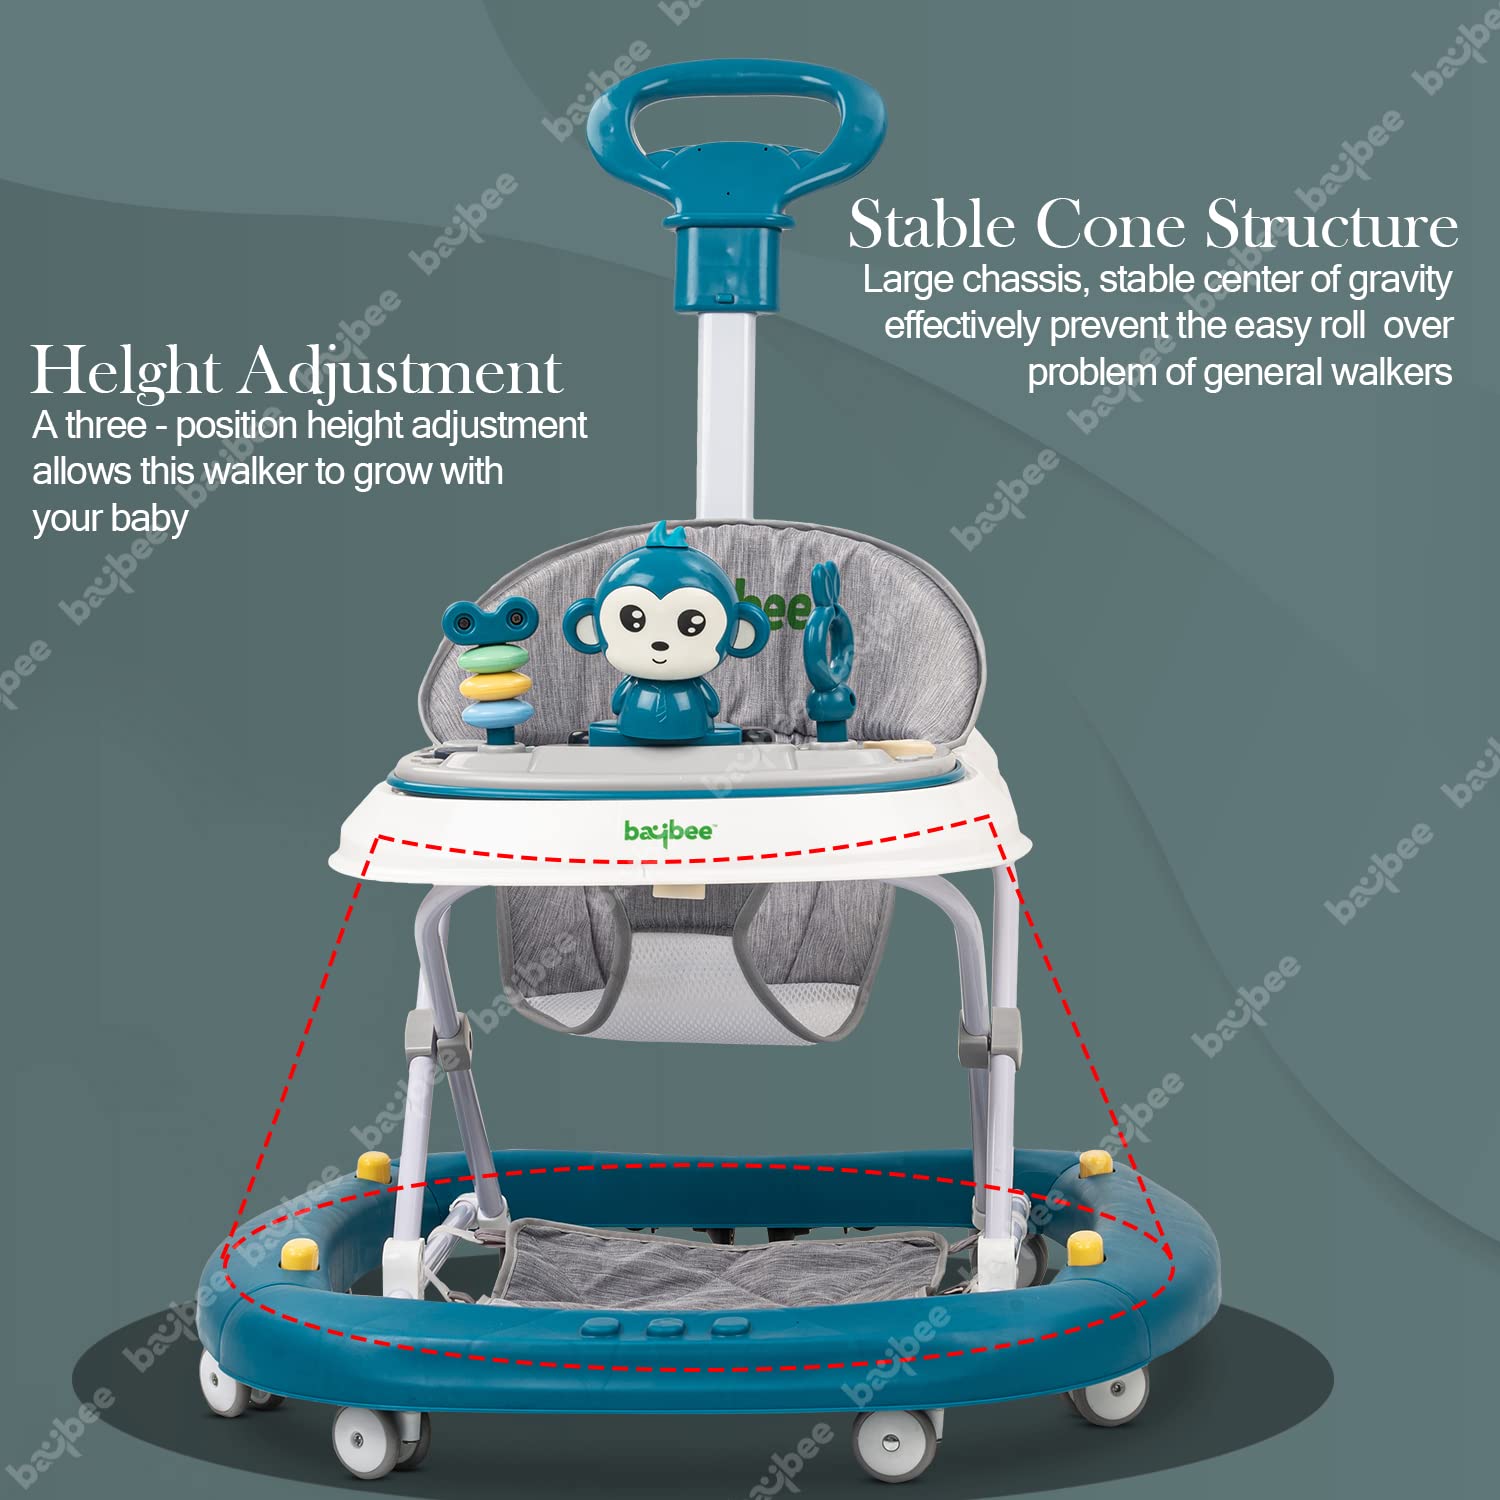 Baybee Baby Walker for Kids, Round Kids Walker with Rocker, Parental Handle, 4 Seat Height Adjustable | Activity Walker for Baby with Musical Toy Bar | Walker Baby 6-18 Months Boy Girl (Orion Blue)